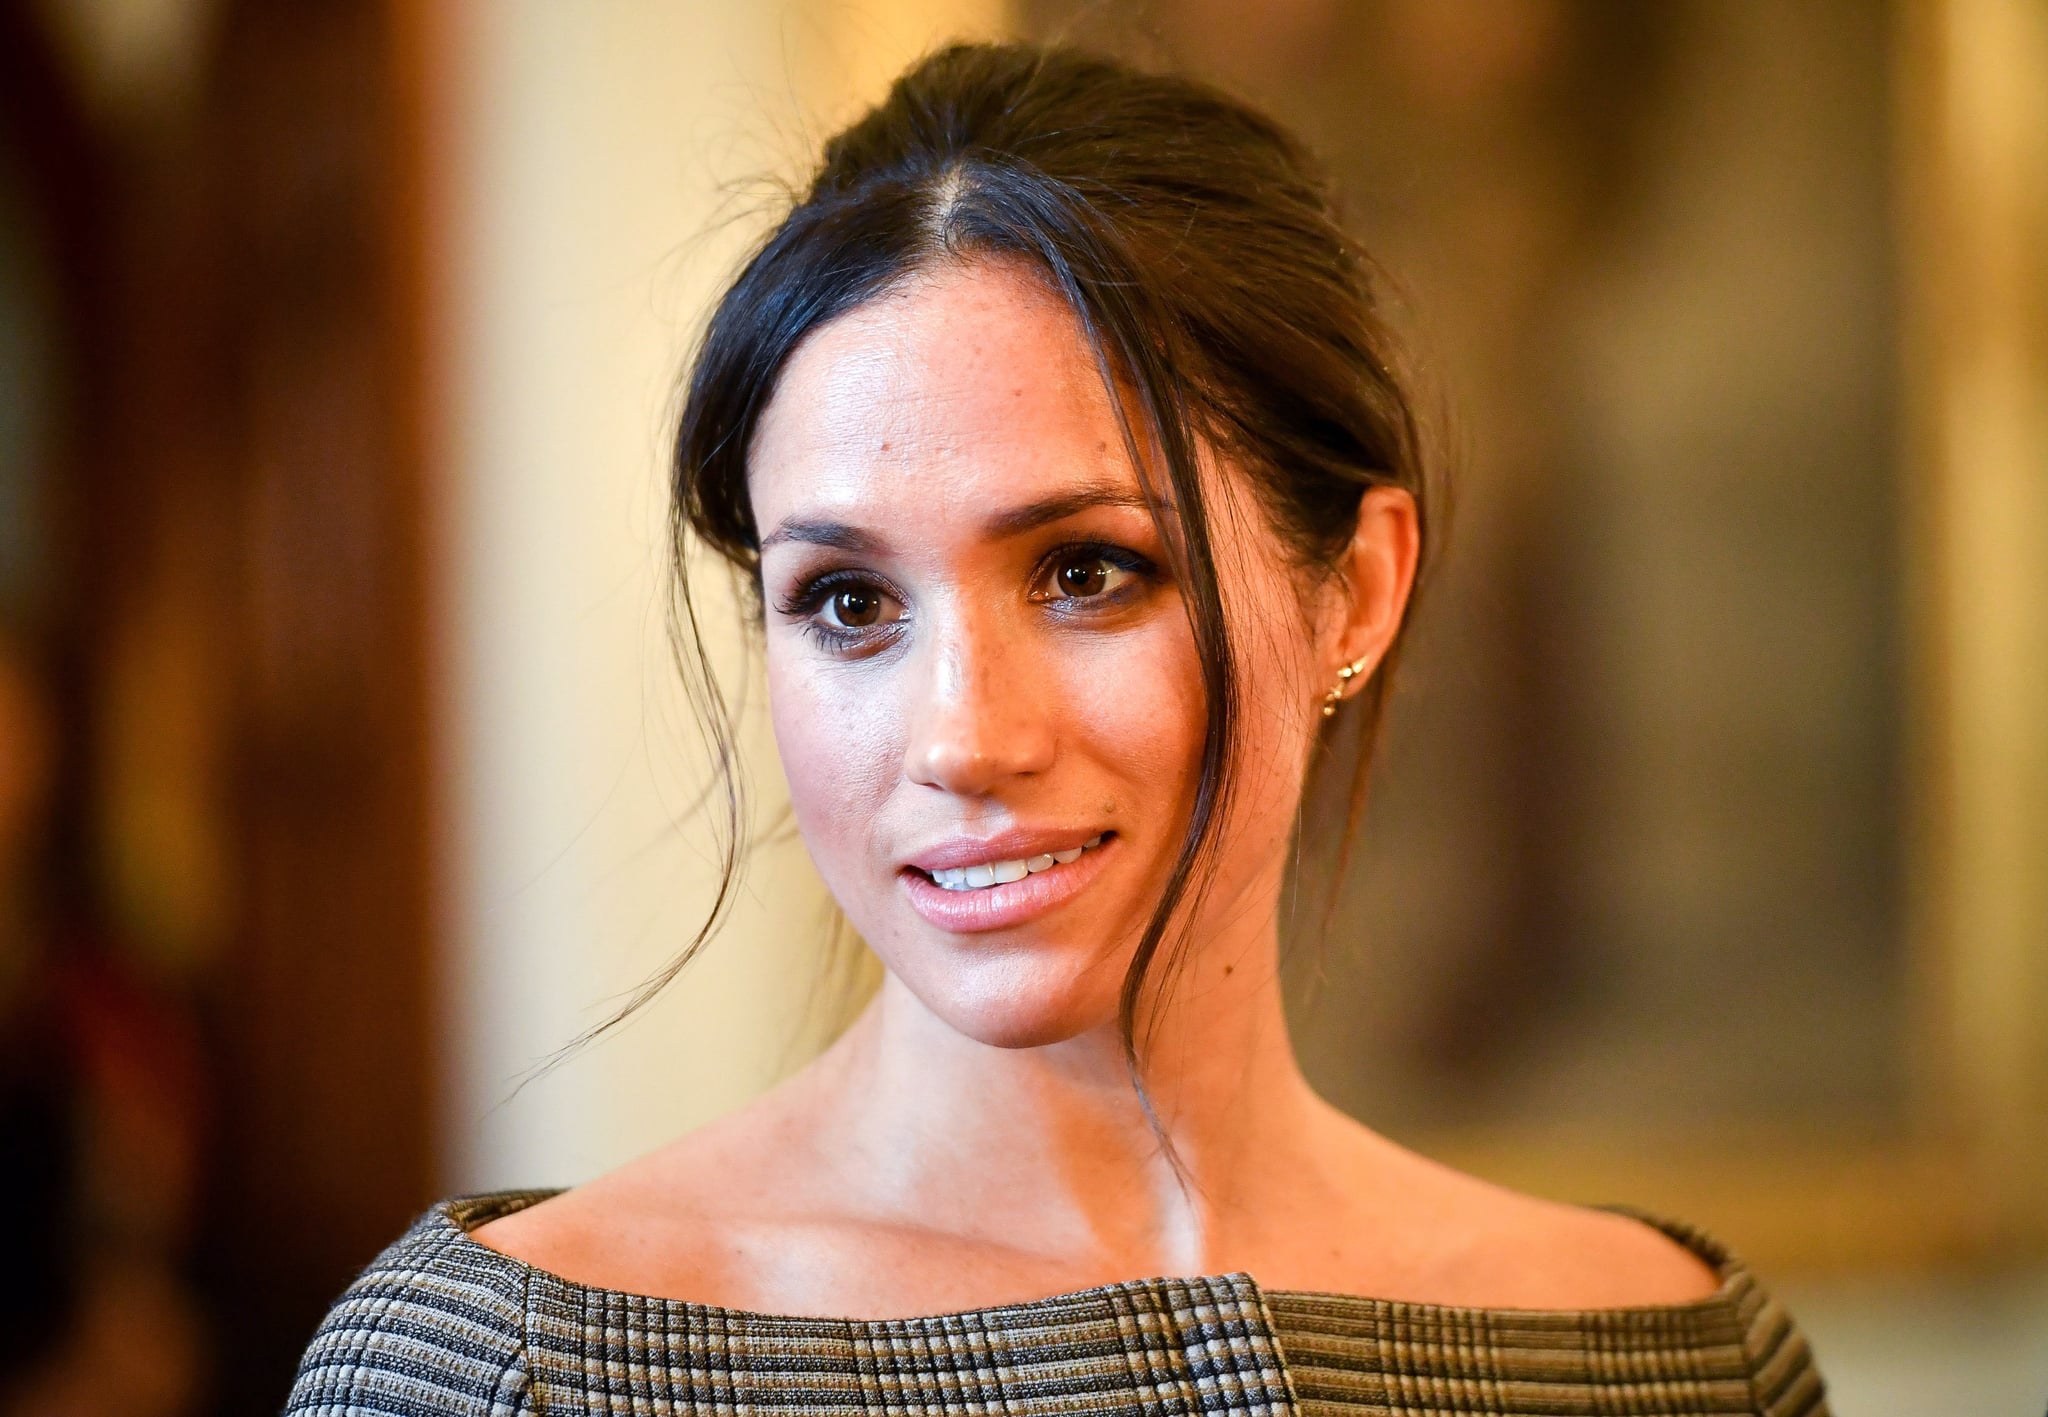 CARDIFF, WALES - JANUARY 18:  Meghan Markle chats with people inside the Drawing Room during a visit to Cardiff Castle on January 18, 2018 in Cardiff, Wales. (Photo by Ben Birchall - WPA Pool / Getty Images)